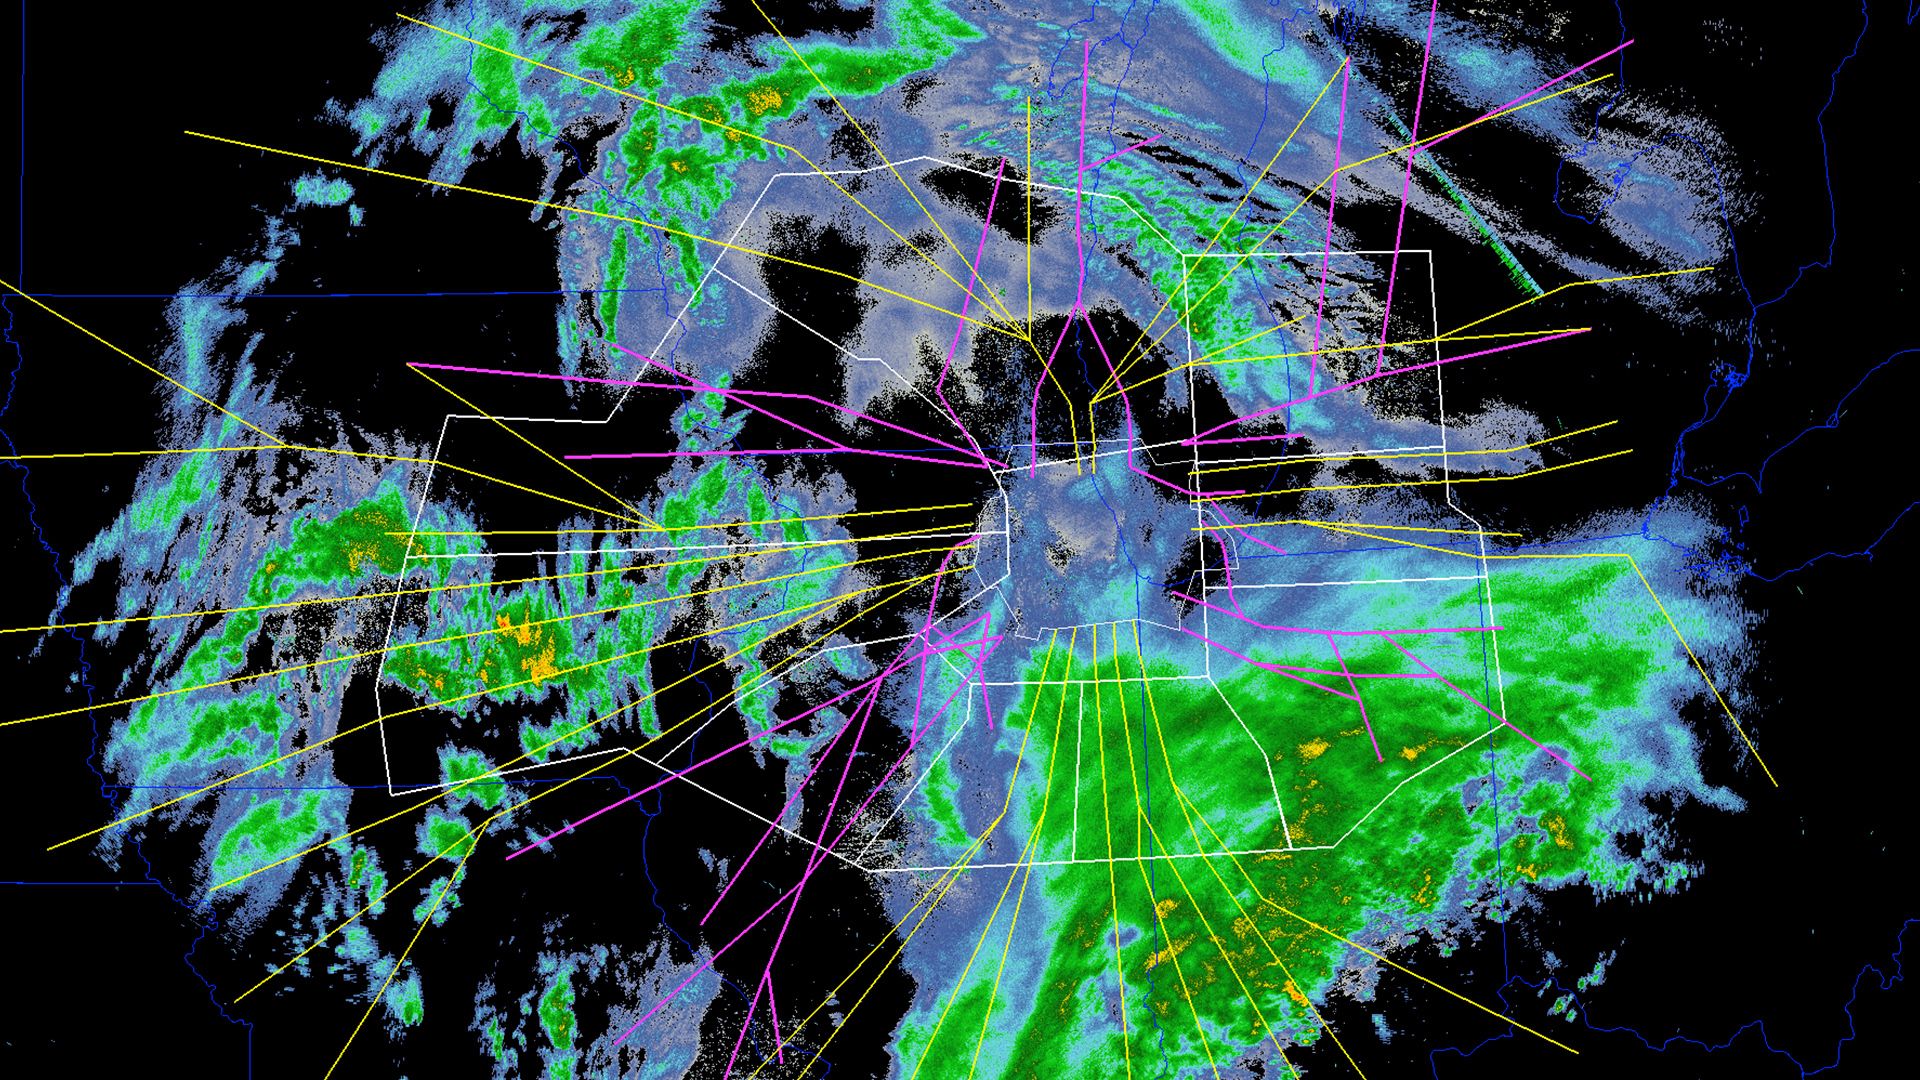 Radar image of air traffic control and weather data in the Chicago area